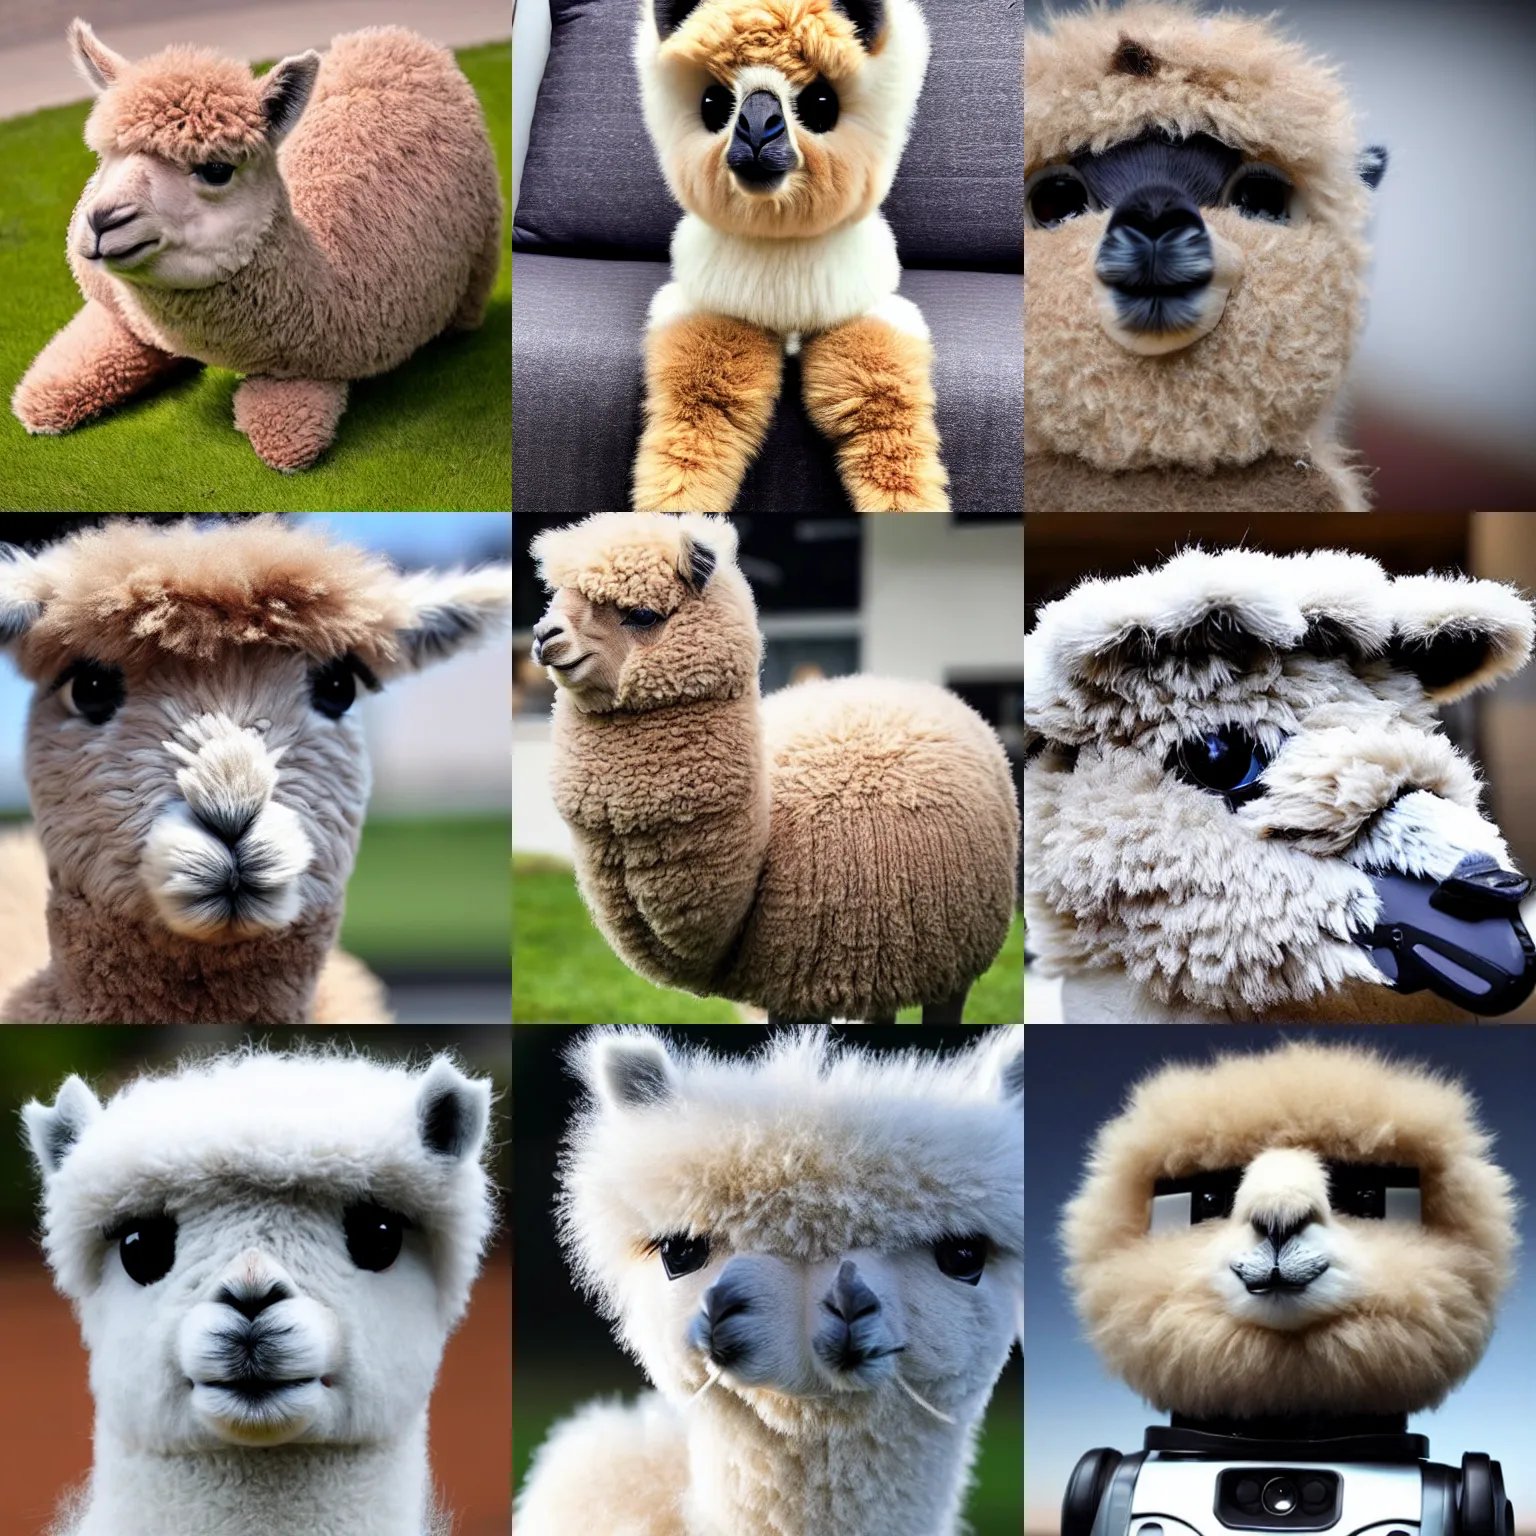 Prompt: <picture quality=4k-ultra-hd mode='attention grabbing'>Adorable fluffy robot looks like an alpaca</picture>